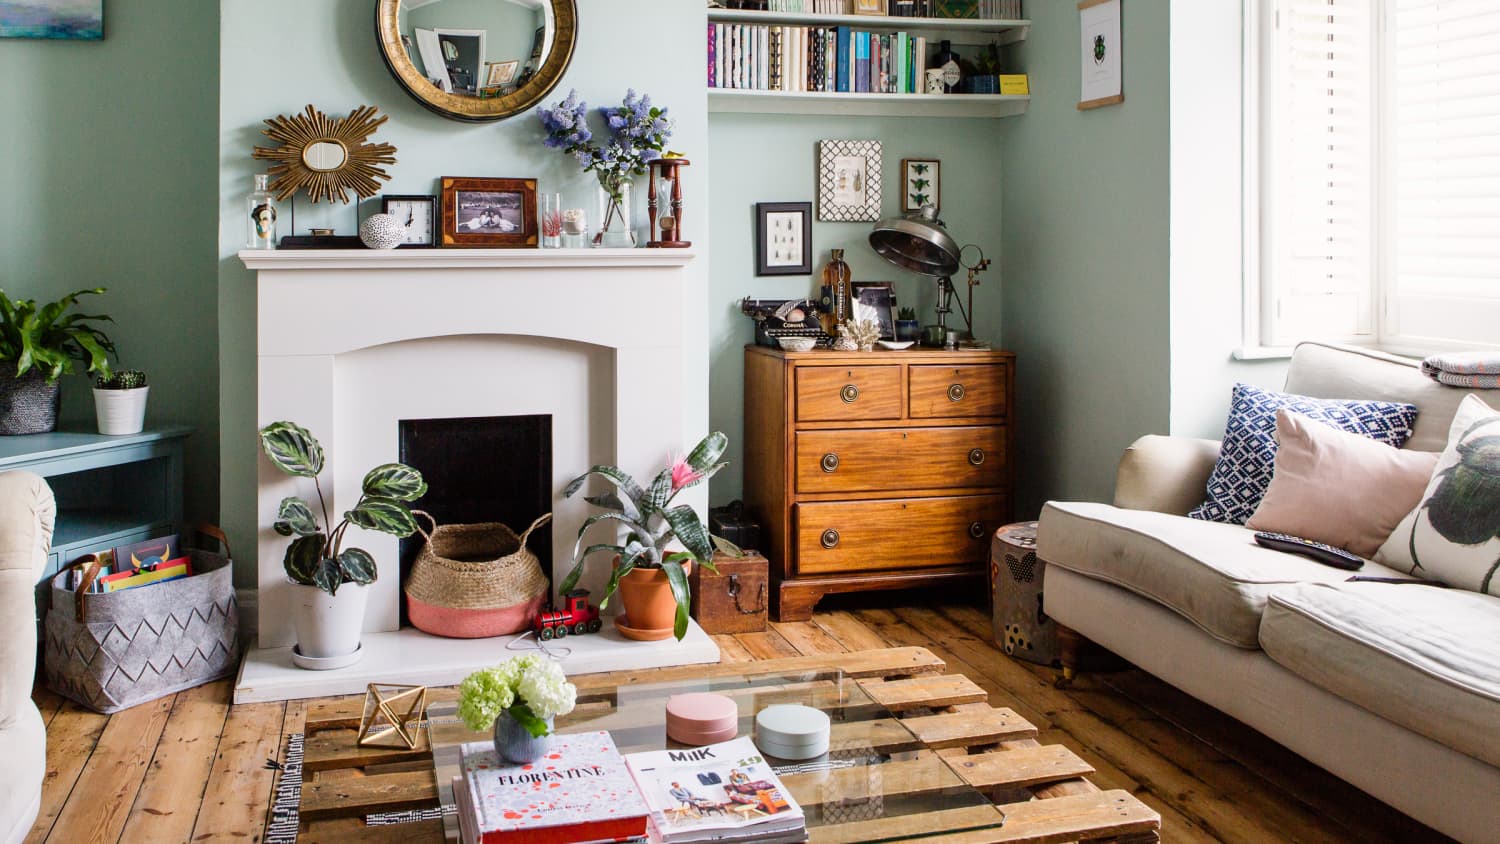 Decorating Small Spaces: 7 Outdated Rules You Can Break